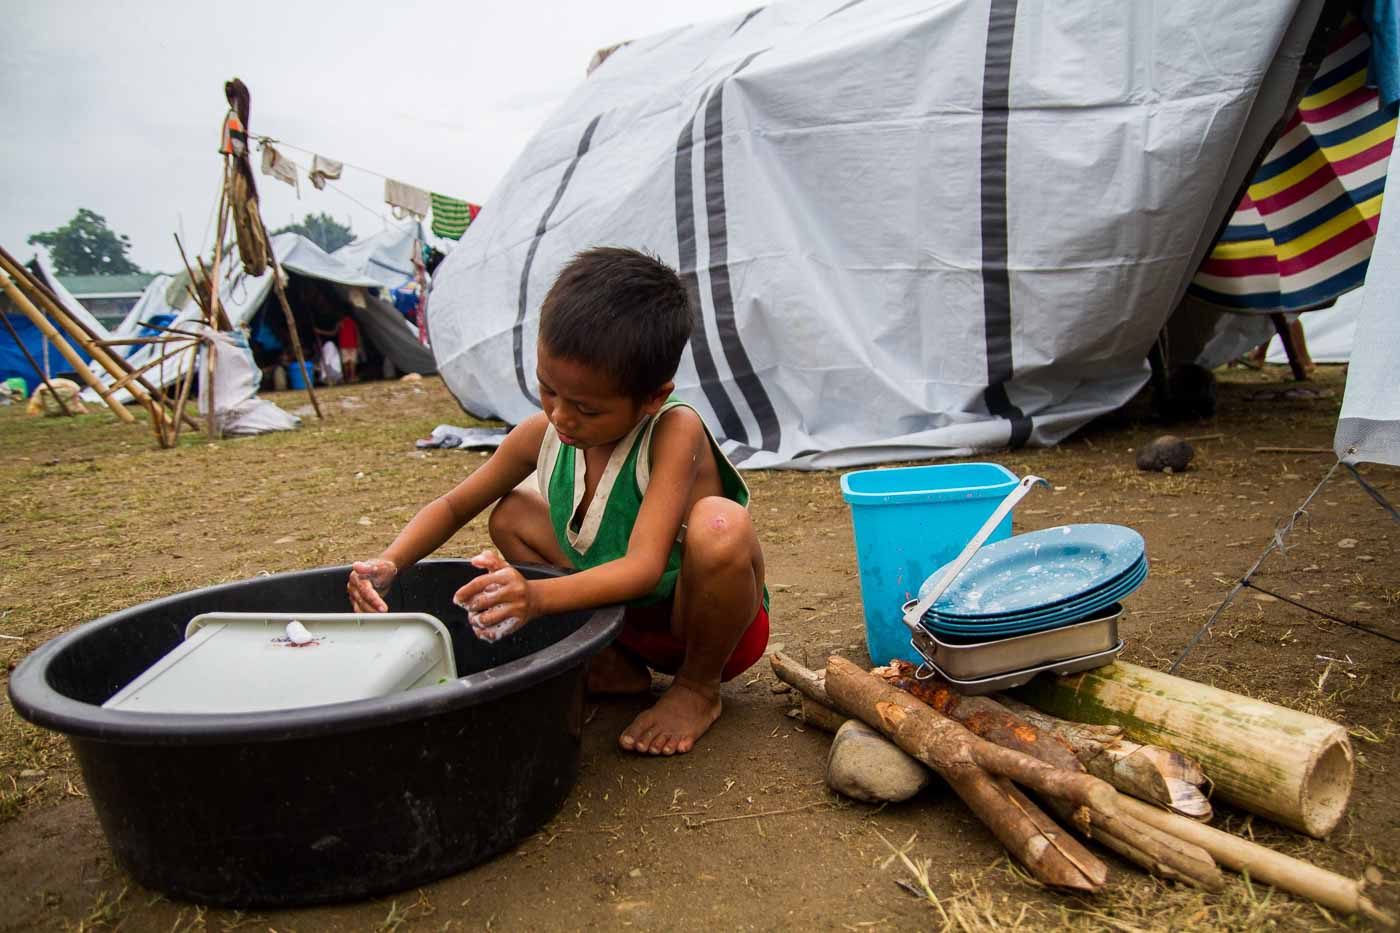 CAUGHT IN THE CROSSFIRE. A Lumad child washes dishes after the family's meal.  